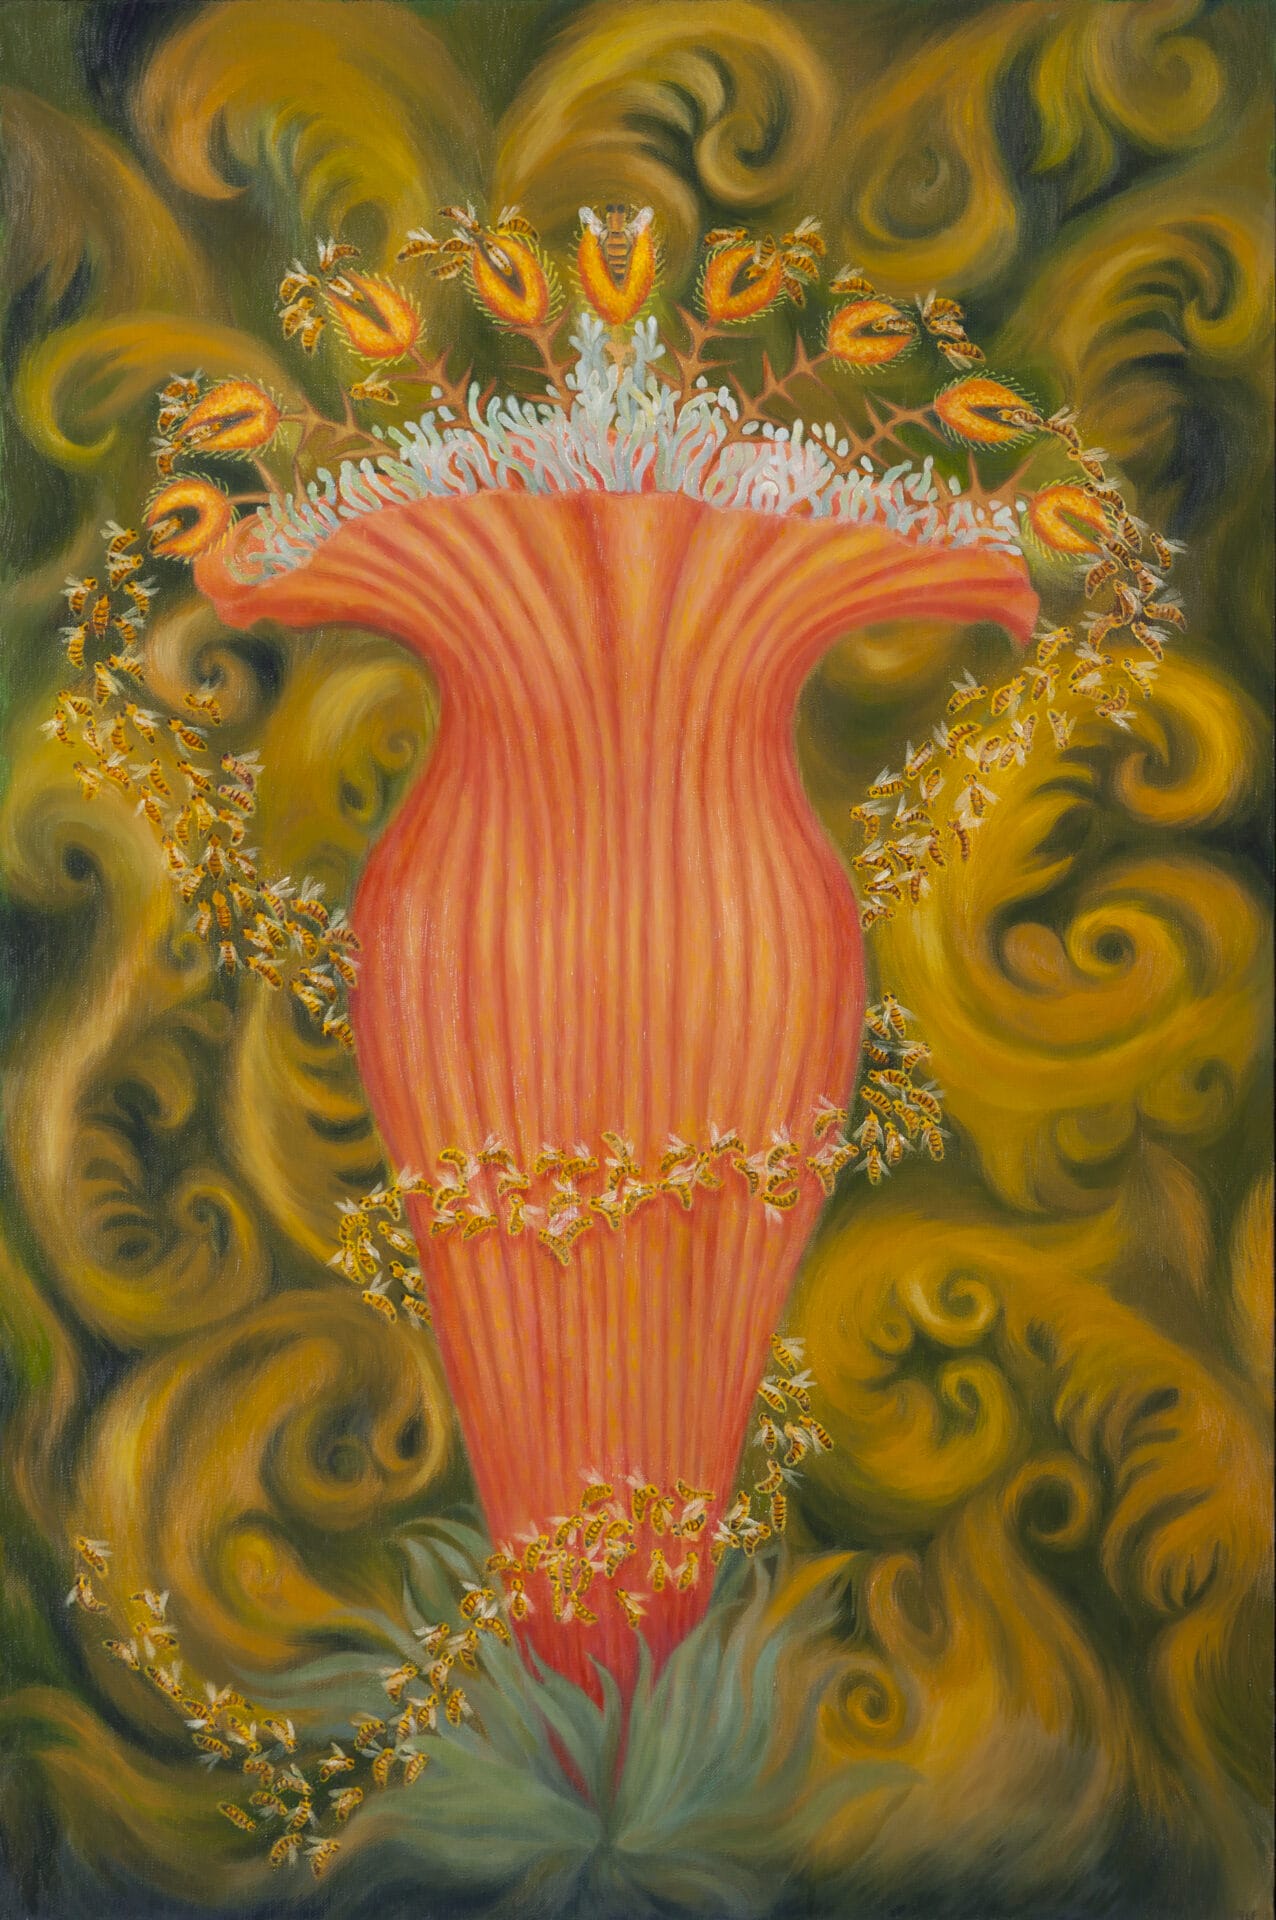 A tall, trumpet-shaped flower in coral hues stands against wispy golden strokes. Bees hover at the top of the flower.